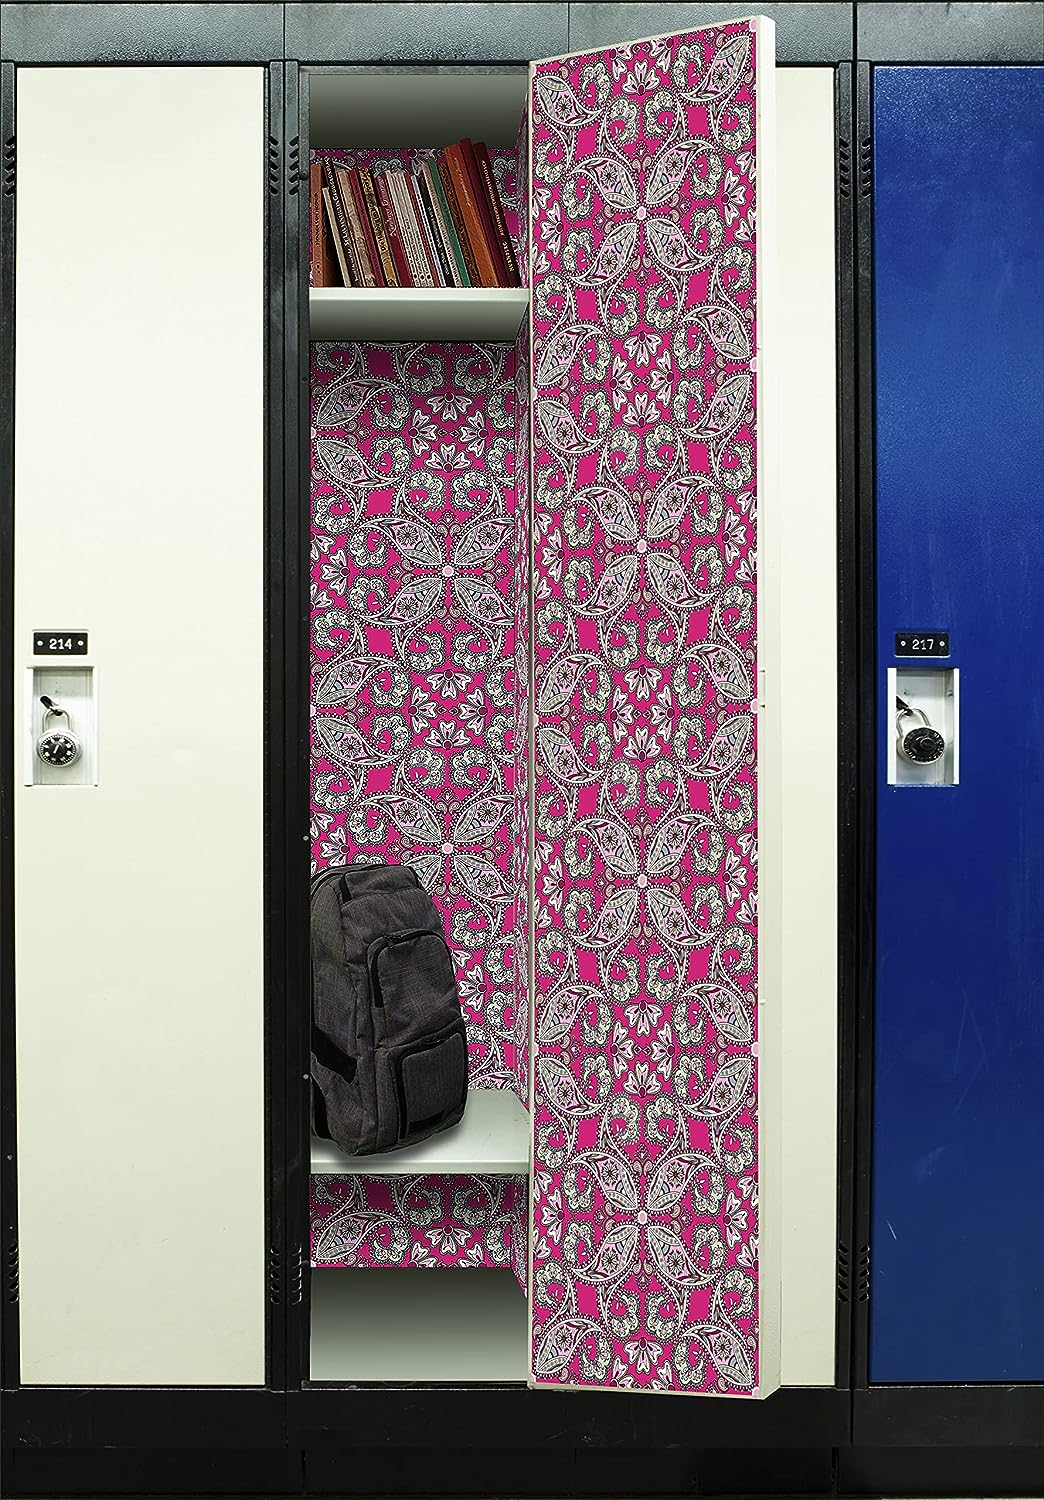 Deluxe School Locker Magnetic Wallpaper (Full sheet Magnetic) - Full Cover Standard Half Lockers - Trimmable, Easy Install, Remove & Reuse - Pack of 12 Sheets - (Floral with Flowers vr31)